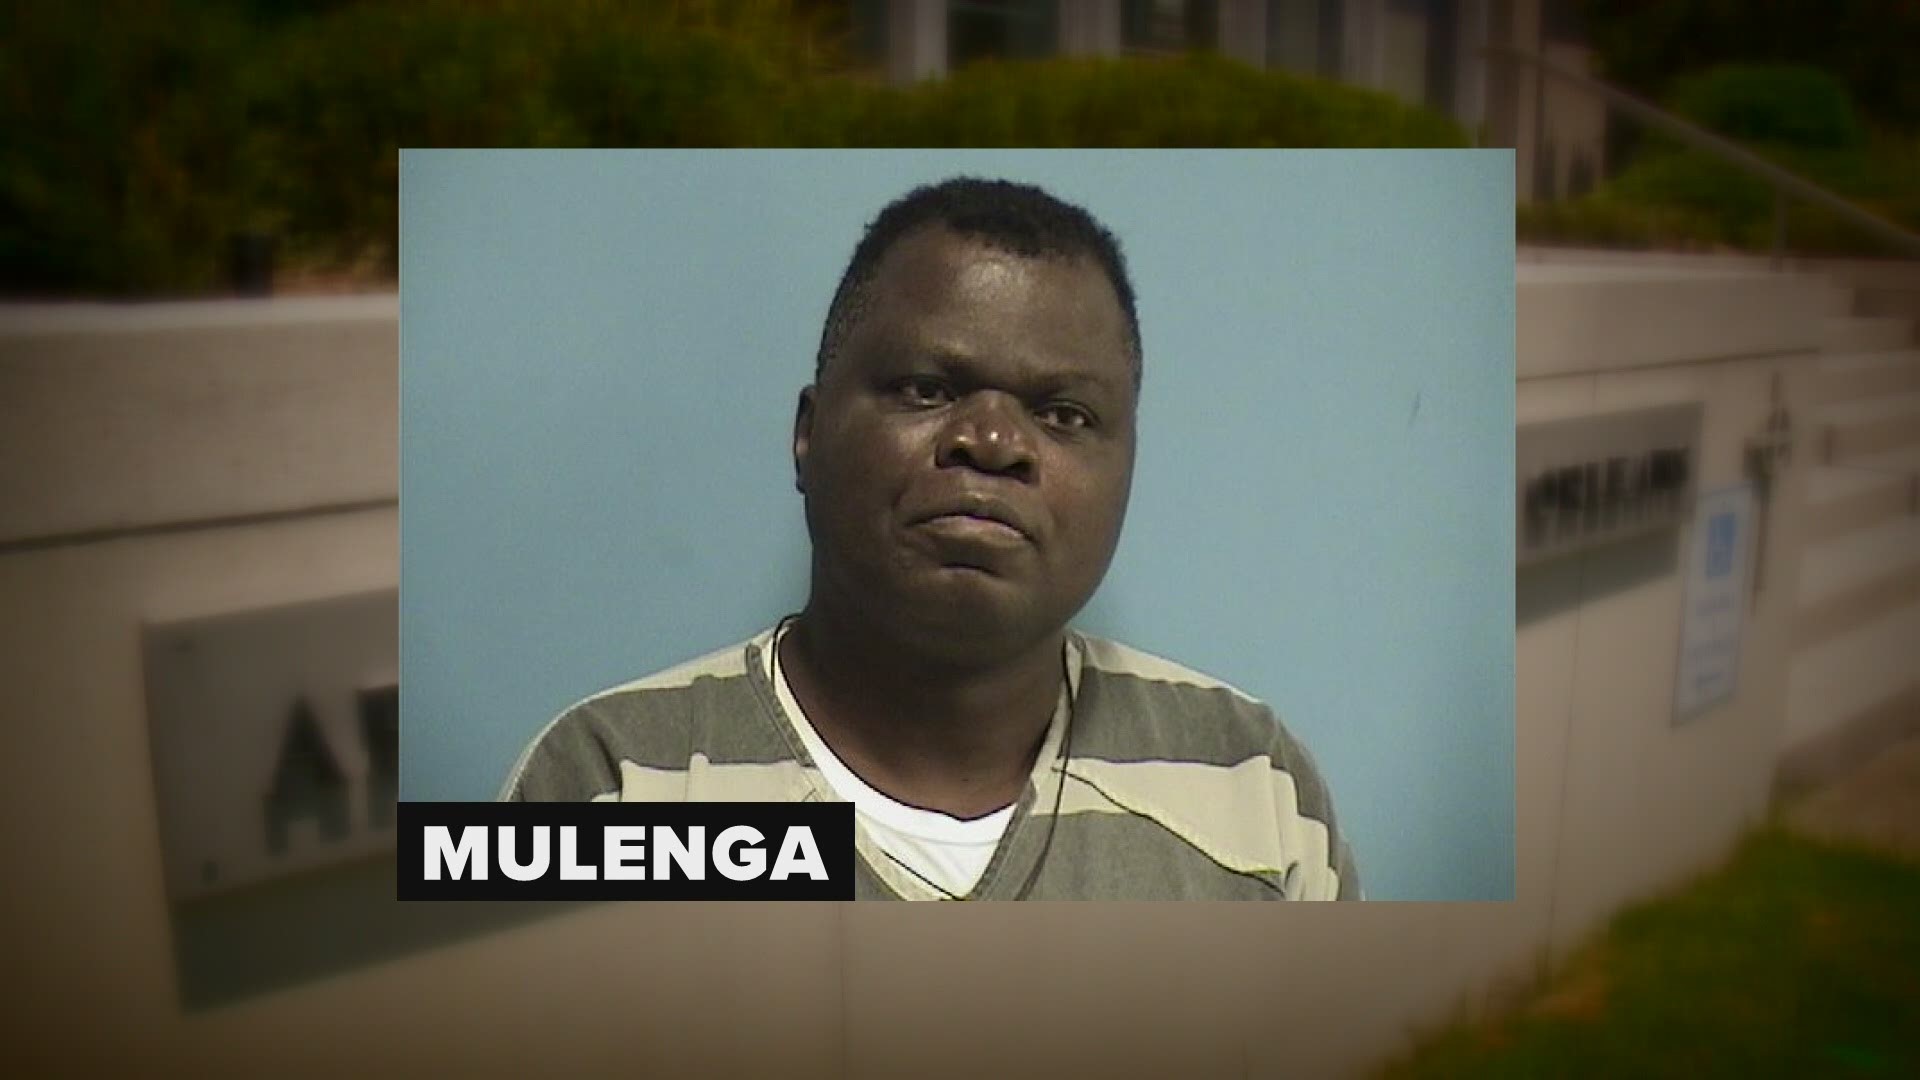 Lynn Michler said in court records that she was grieving her husband’s death when Mulenga approached her and began touching her inappropriately.